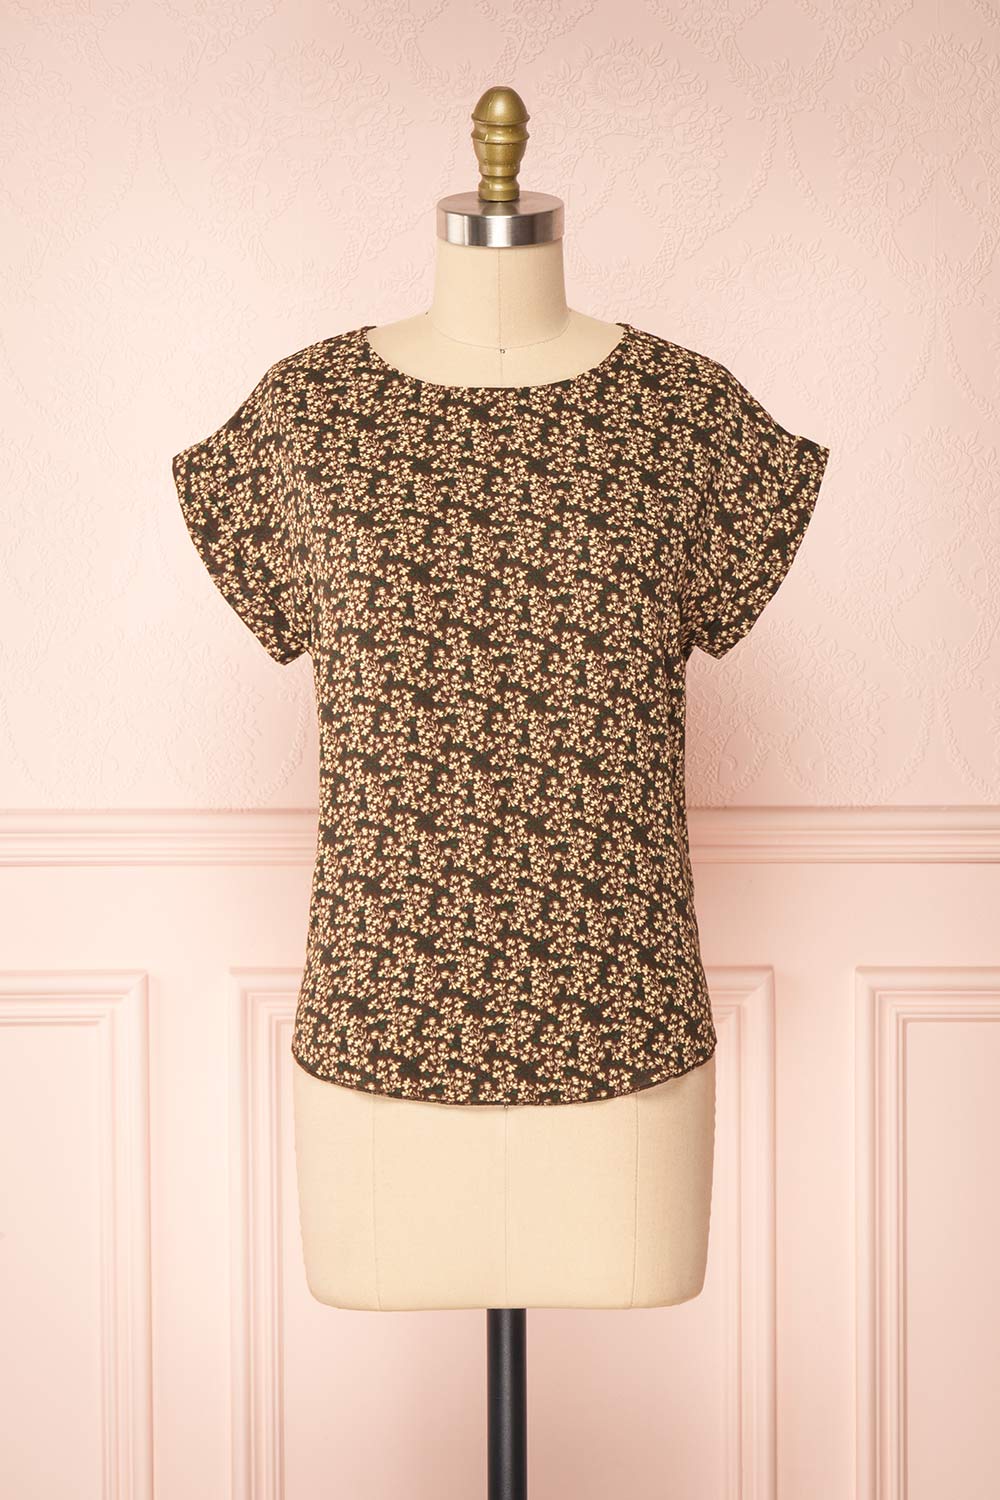 Maxandre Brown Patterned Short Sleeve Blouse | Boutique 1861 front view 